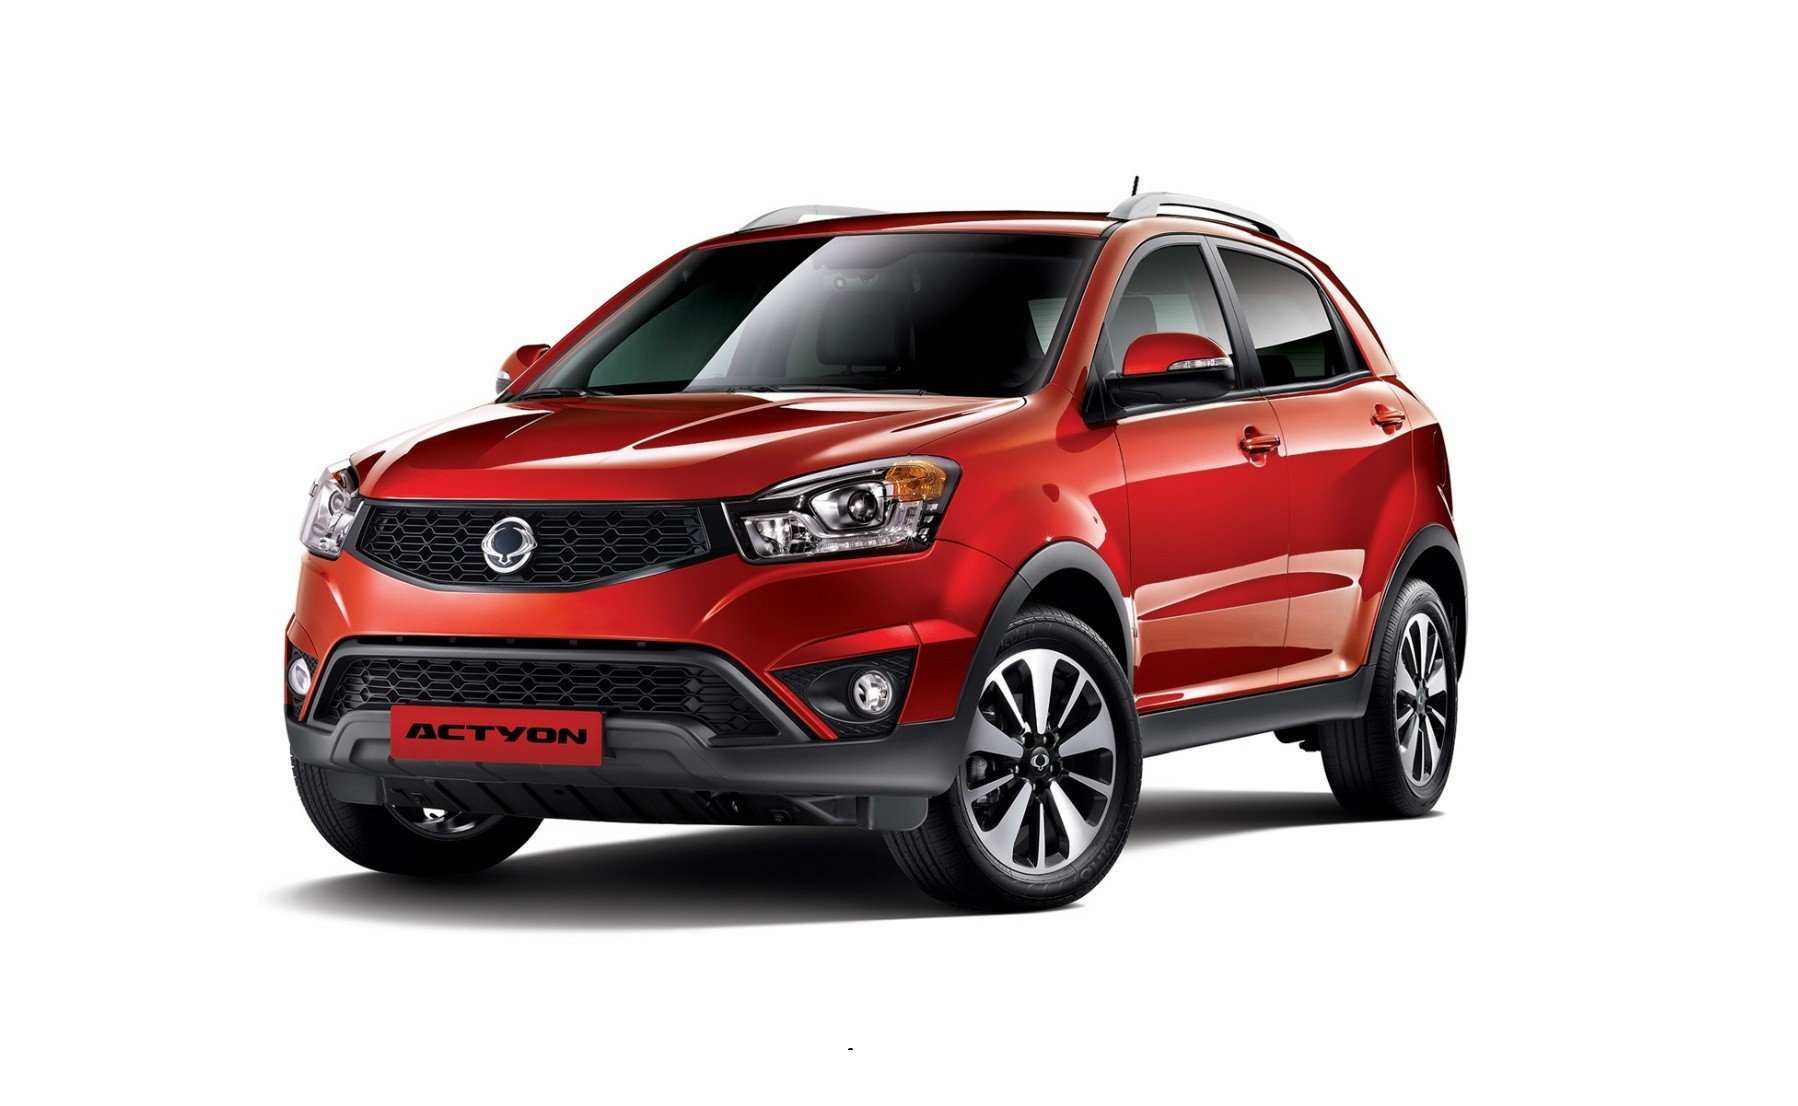 Санг енг актион 2 бензин. SSANGYONG Actyon II. SSANGYOUNG Act. SSANGYONG Actyon 2013. SSANGYONG Actyon New 2022.